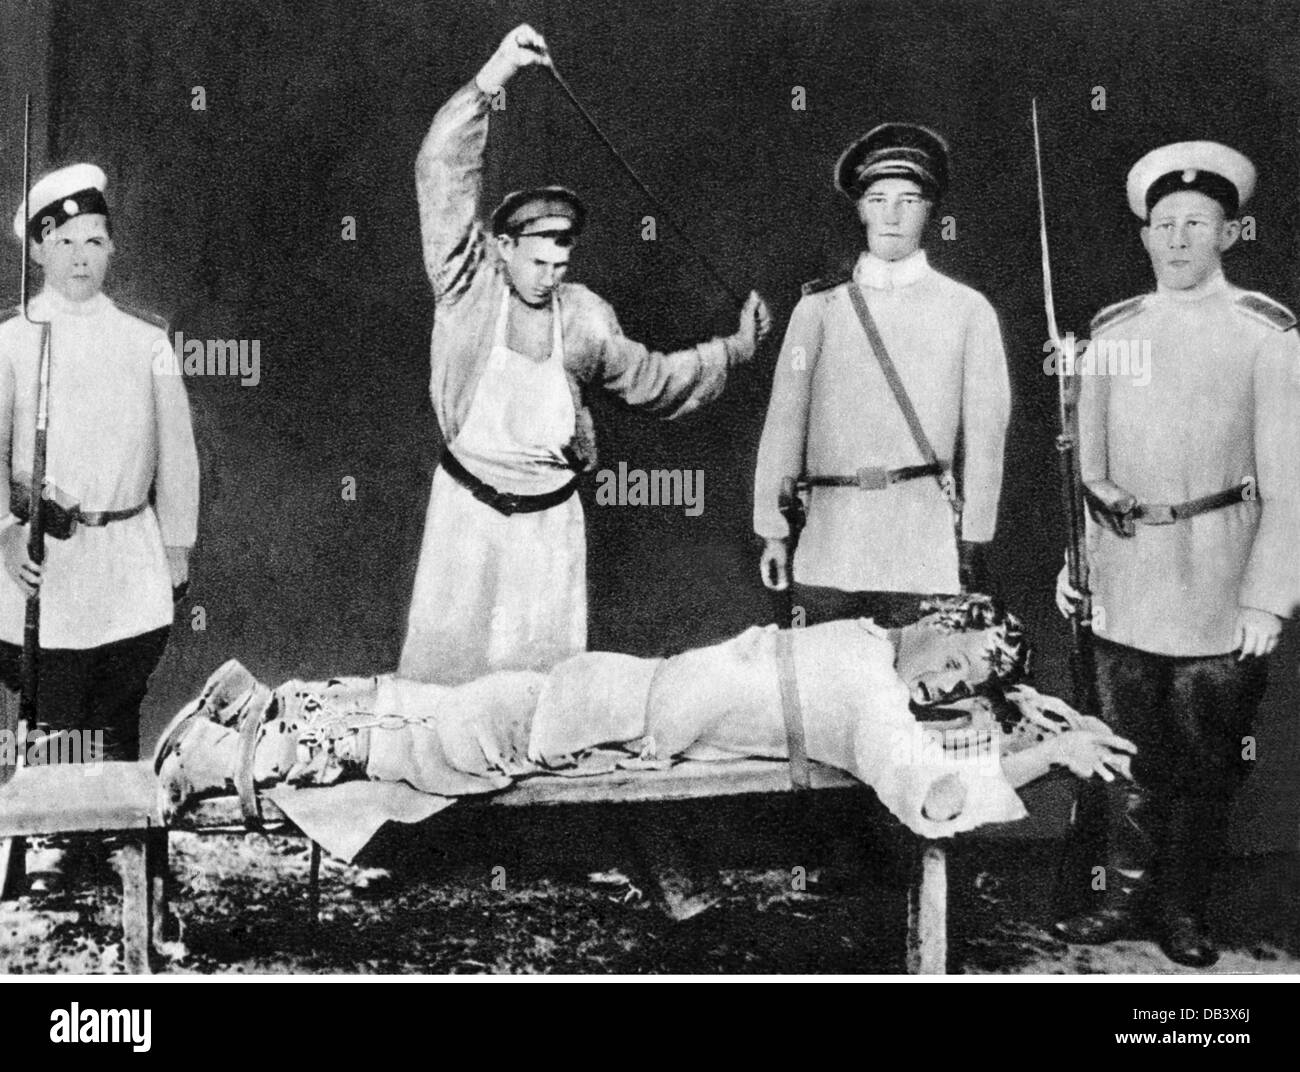 justice, penitentiary system, flogging, fustigation of a convict in Malzewska prison before the deportation to Siberia, circa 1900, Additional-Rights-Clearences-Not Available Stock Photo